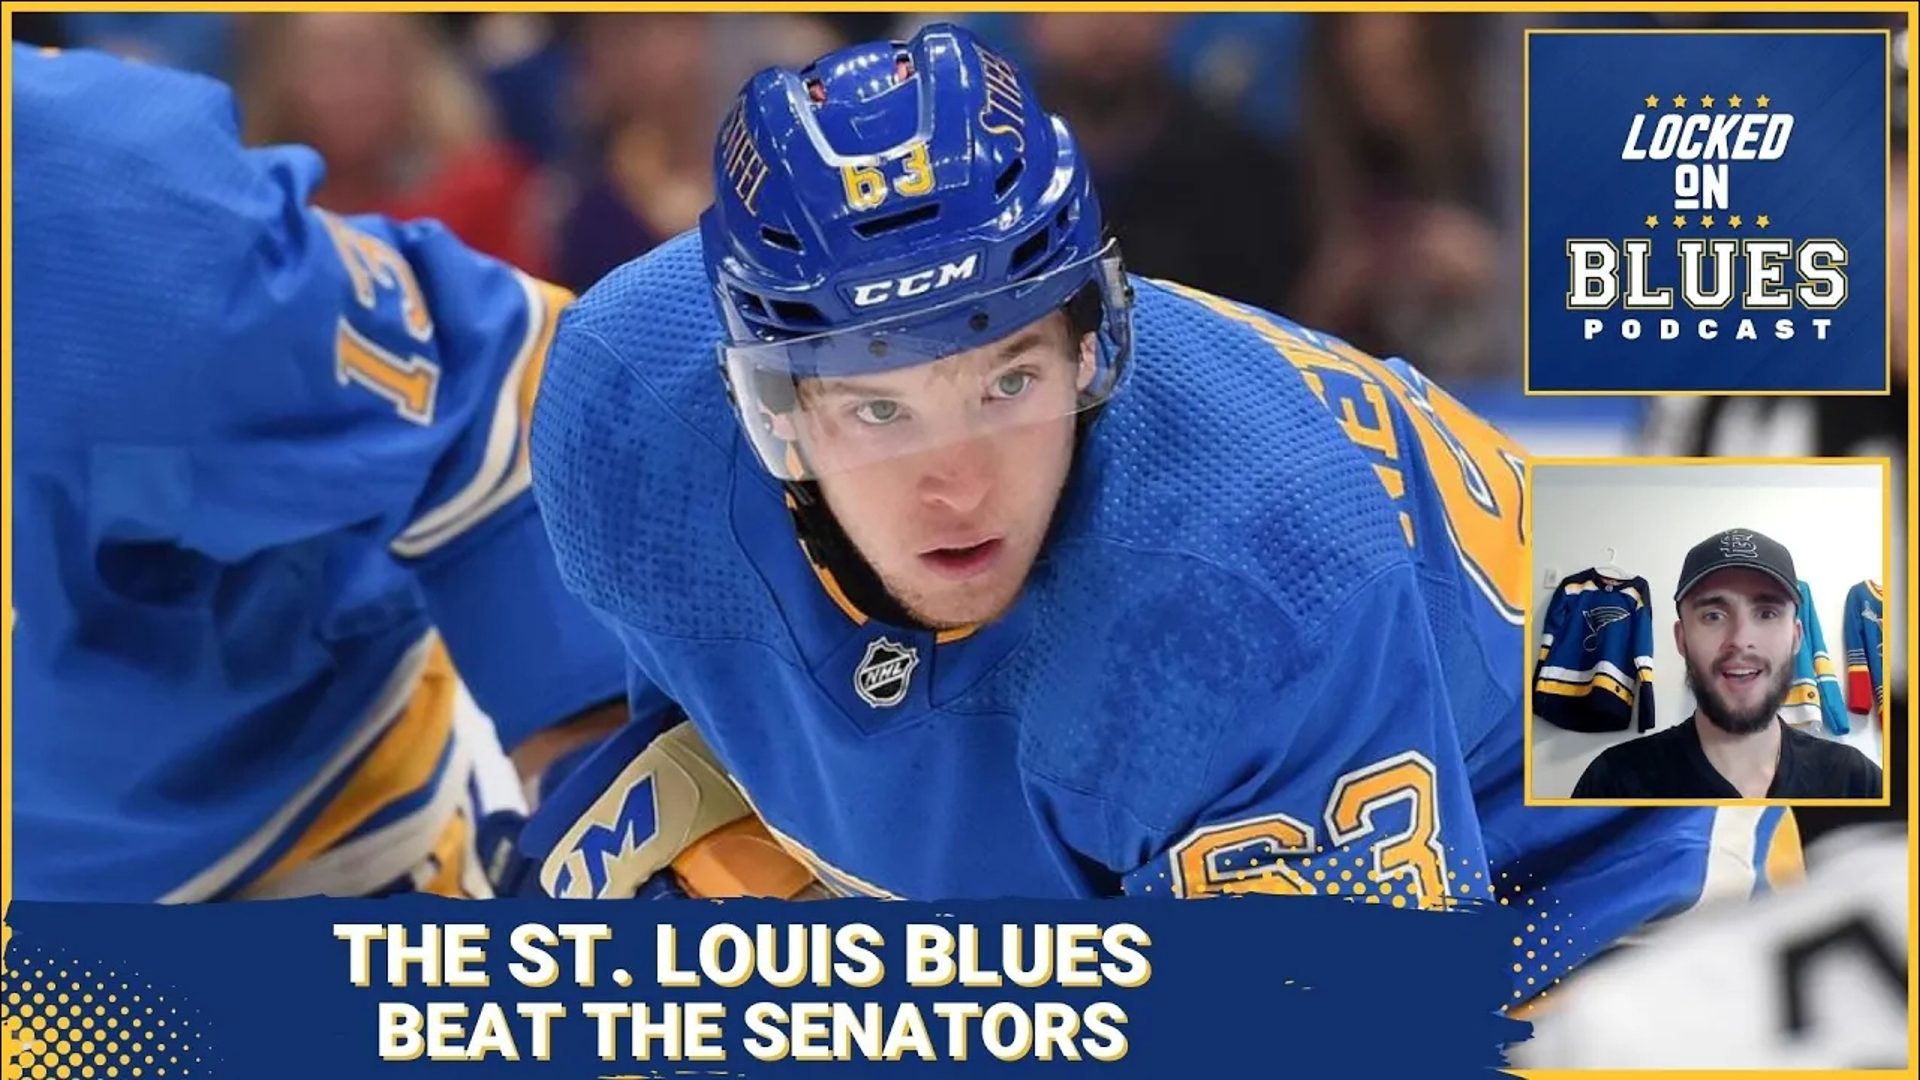 Josh Hyman covers the Blues' loss vs the Lightning and win vs the Senators. He talks about the recent play of Jake Neighbours and gives a few injury updates.